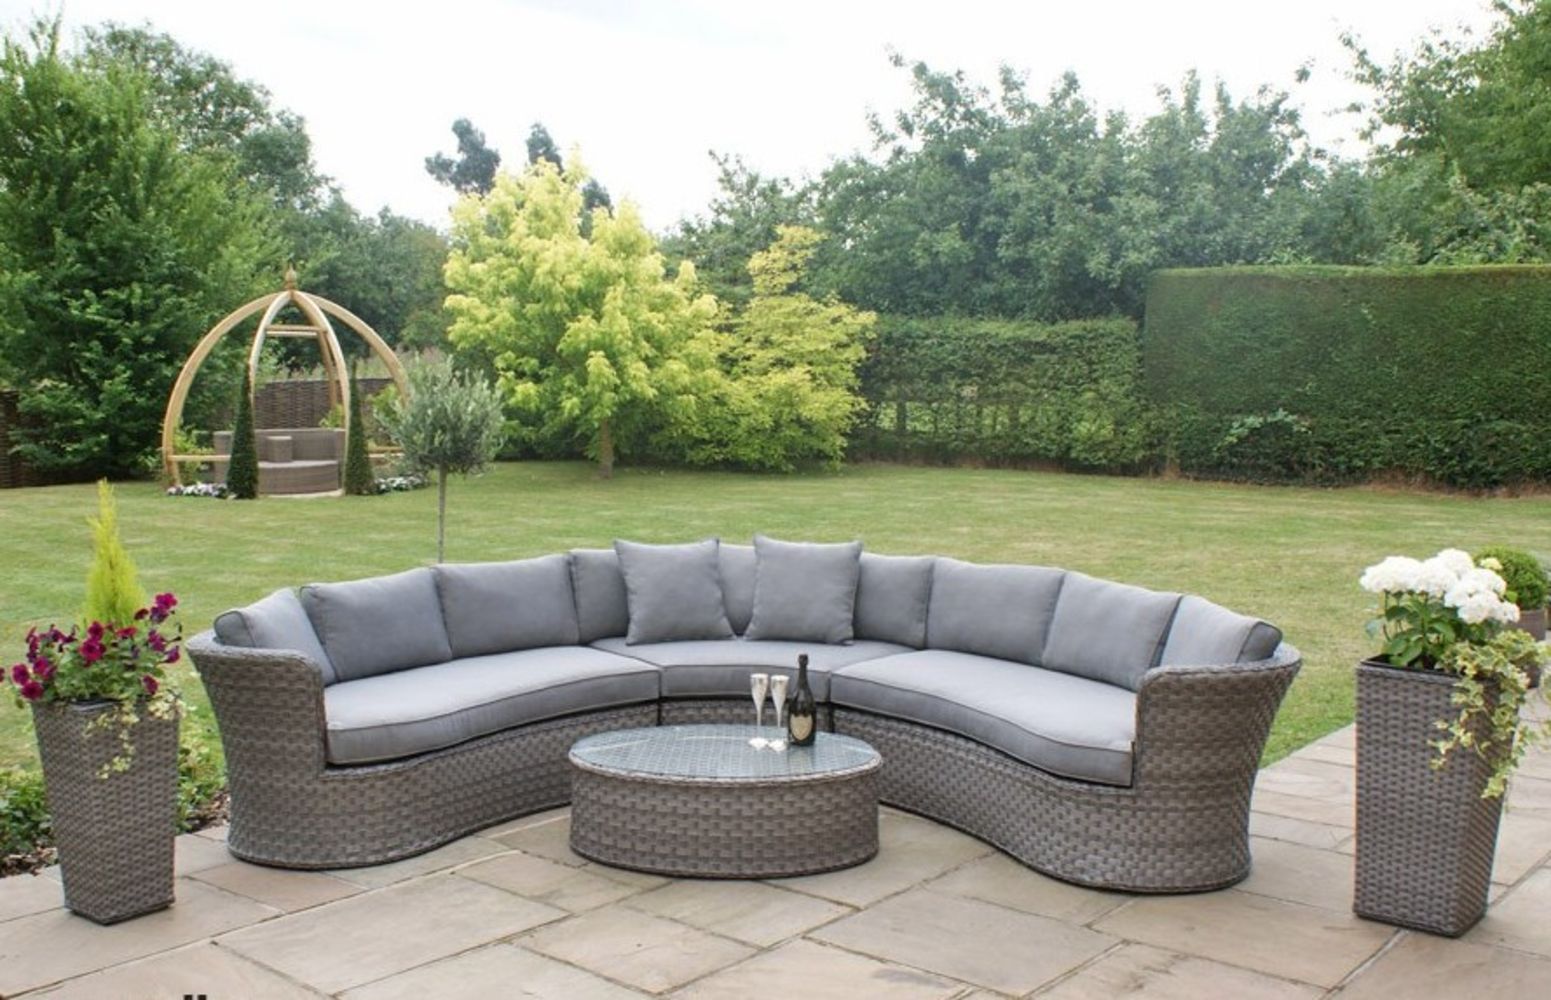 "The Chelsea Garden Company" Rattan Garden Furniture Clearance: Dining Sets, Sofas, Loungers and Cooler Tables